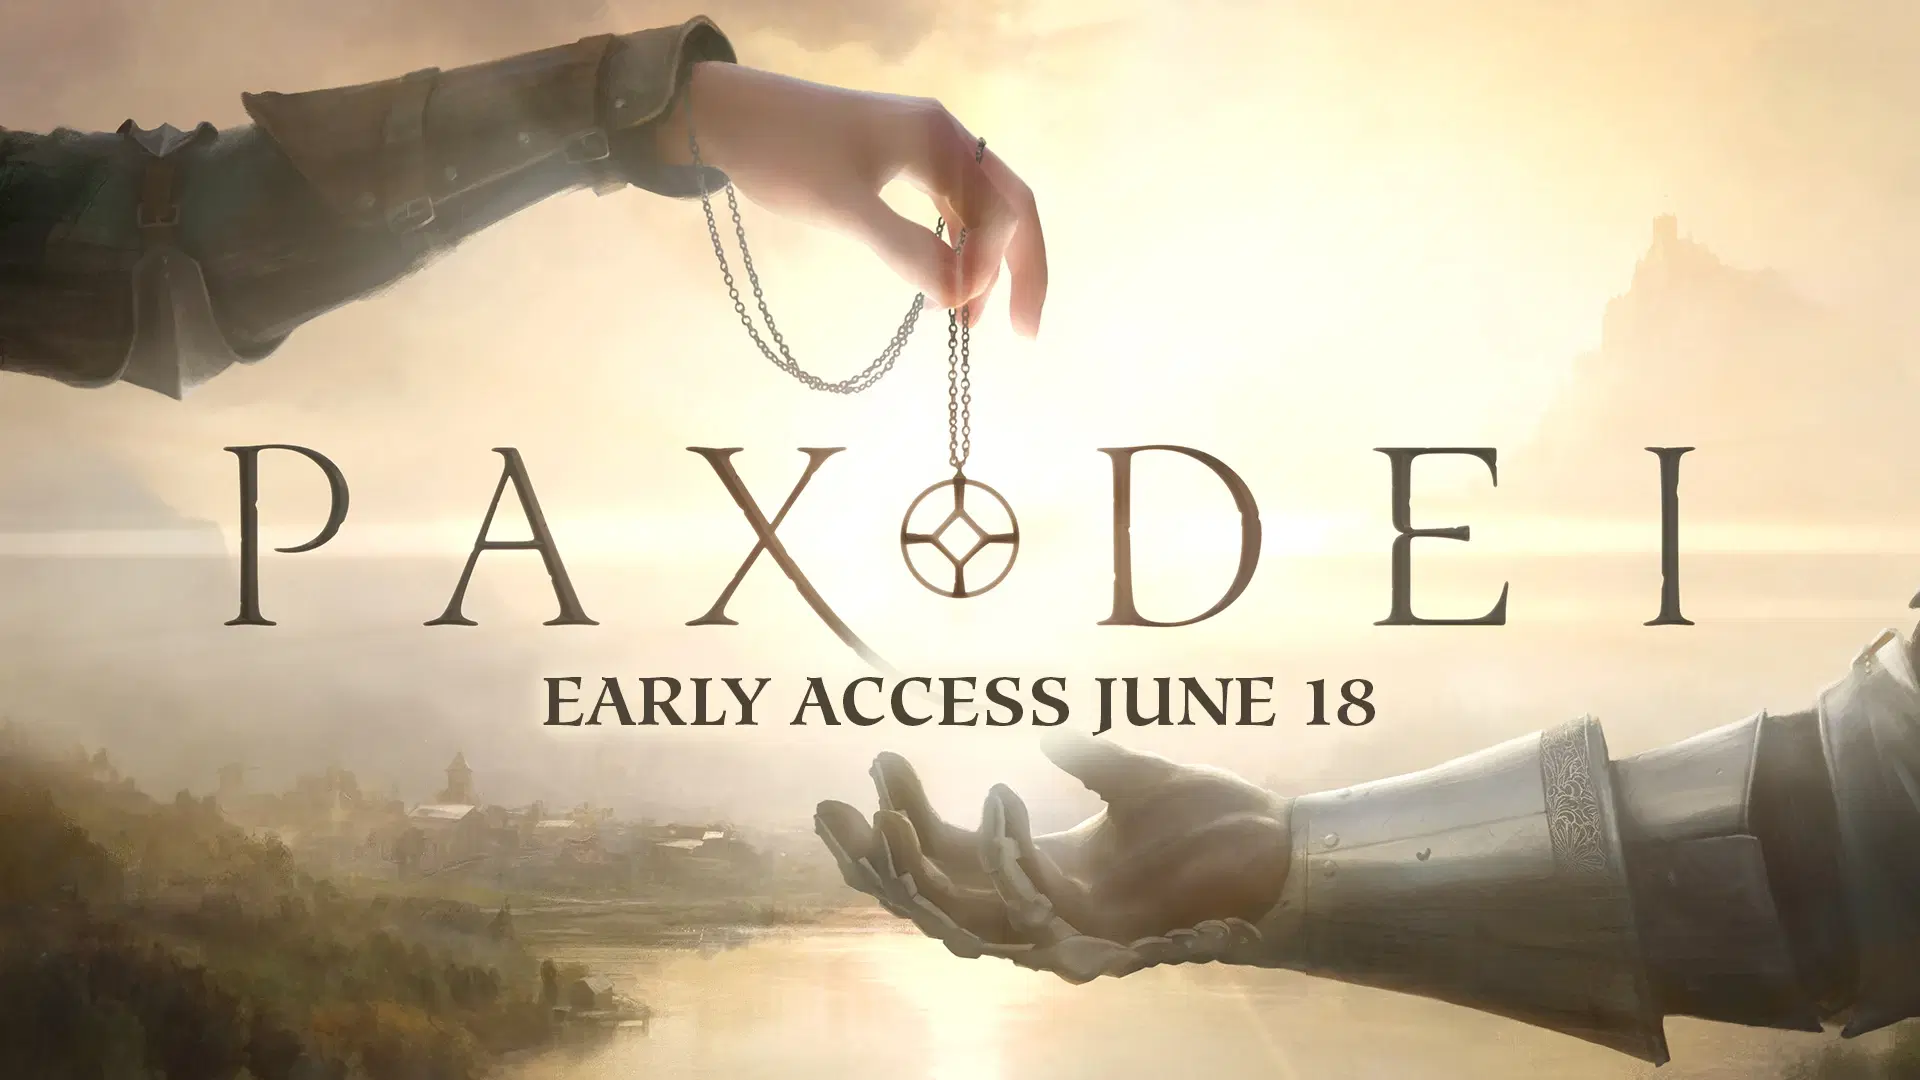 Pax Dei will enter Early Access on June 18th